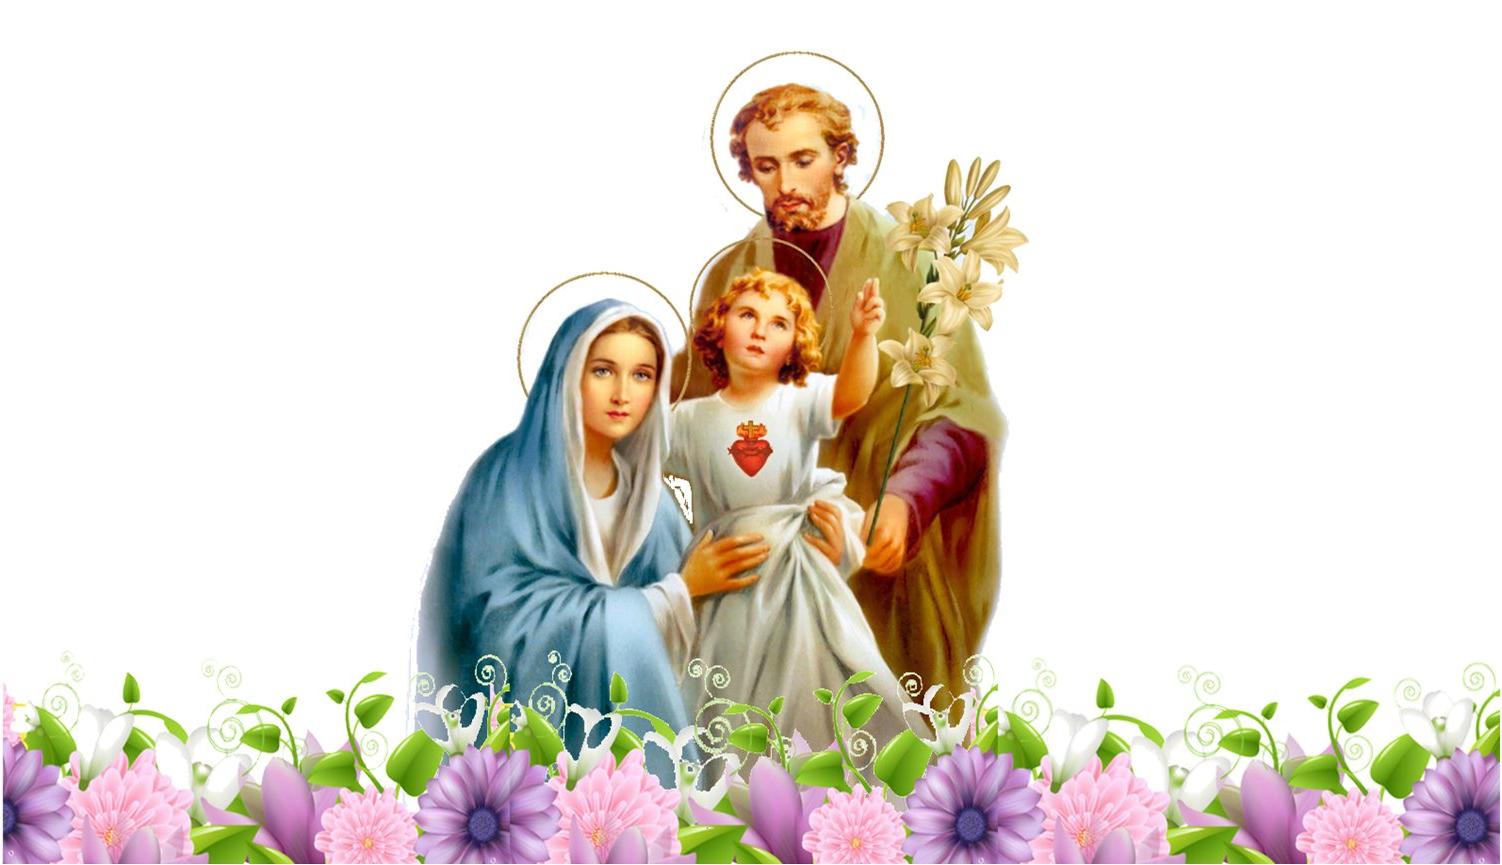 Holy Family 1080P 2k 4k Full HD Wallpapers Backgrounds Free Download   Wallpaper Crafter